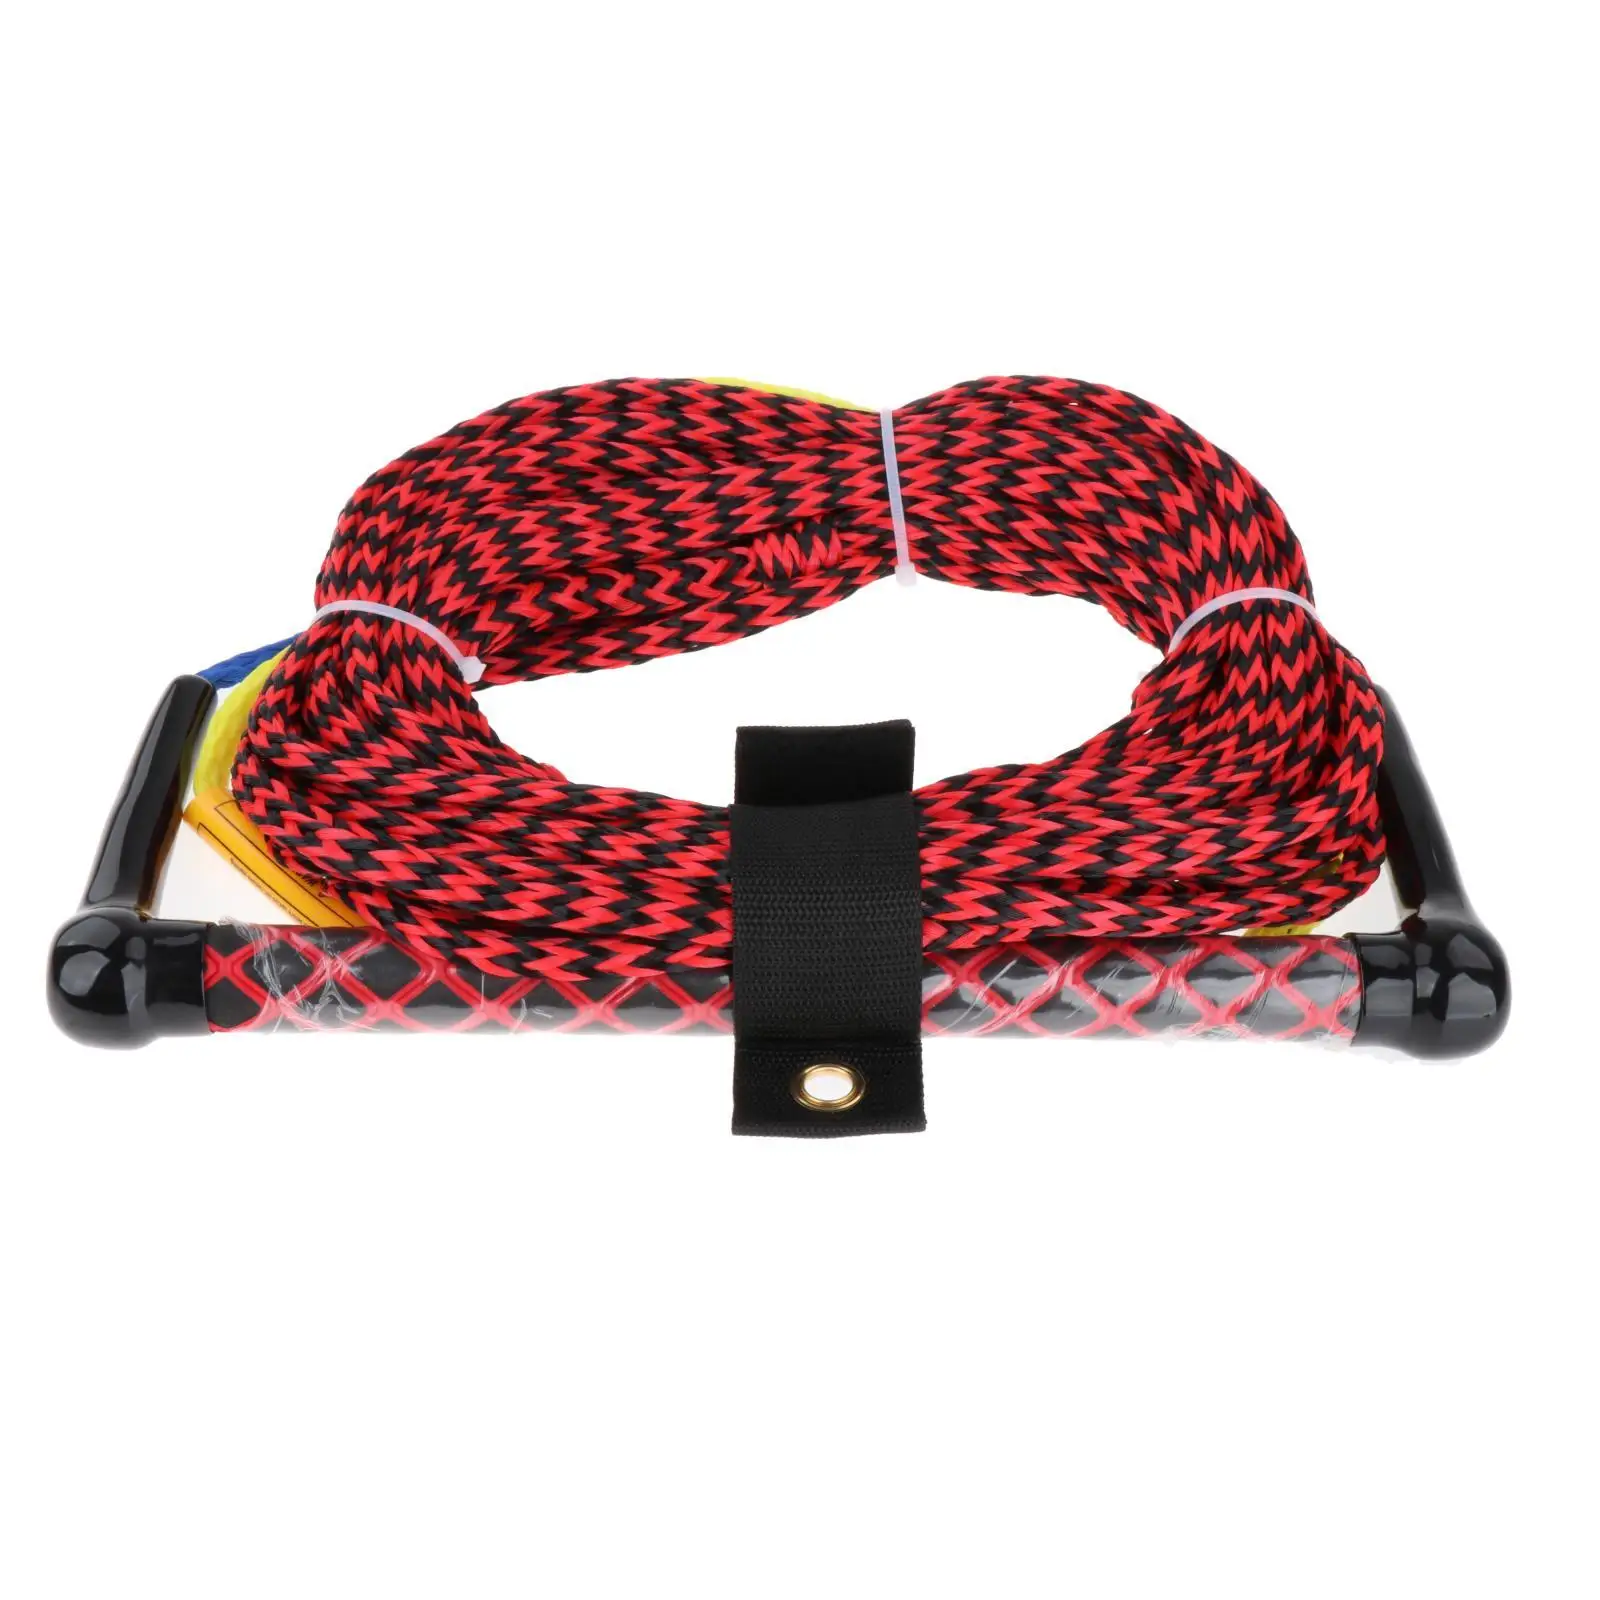 Water Skiing Surfing Rope Floating with Handle for Water Sports Kneeboard Wake